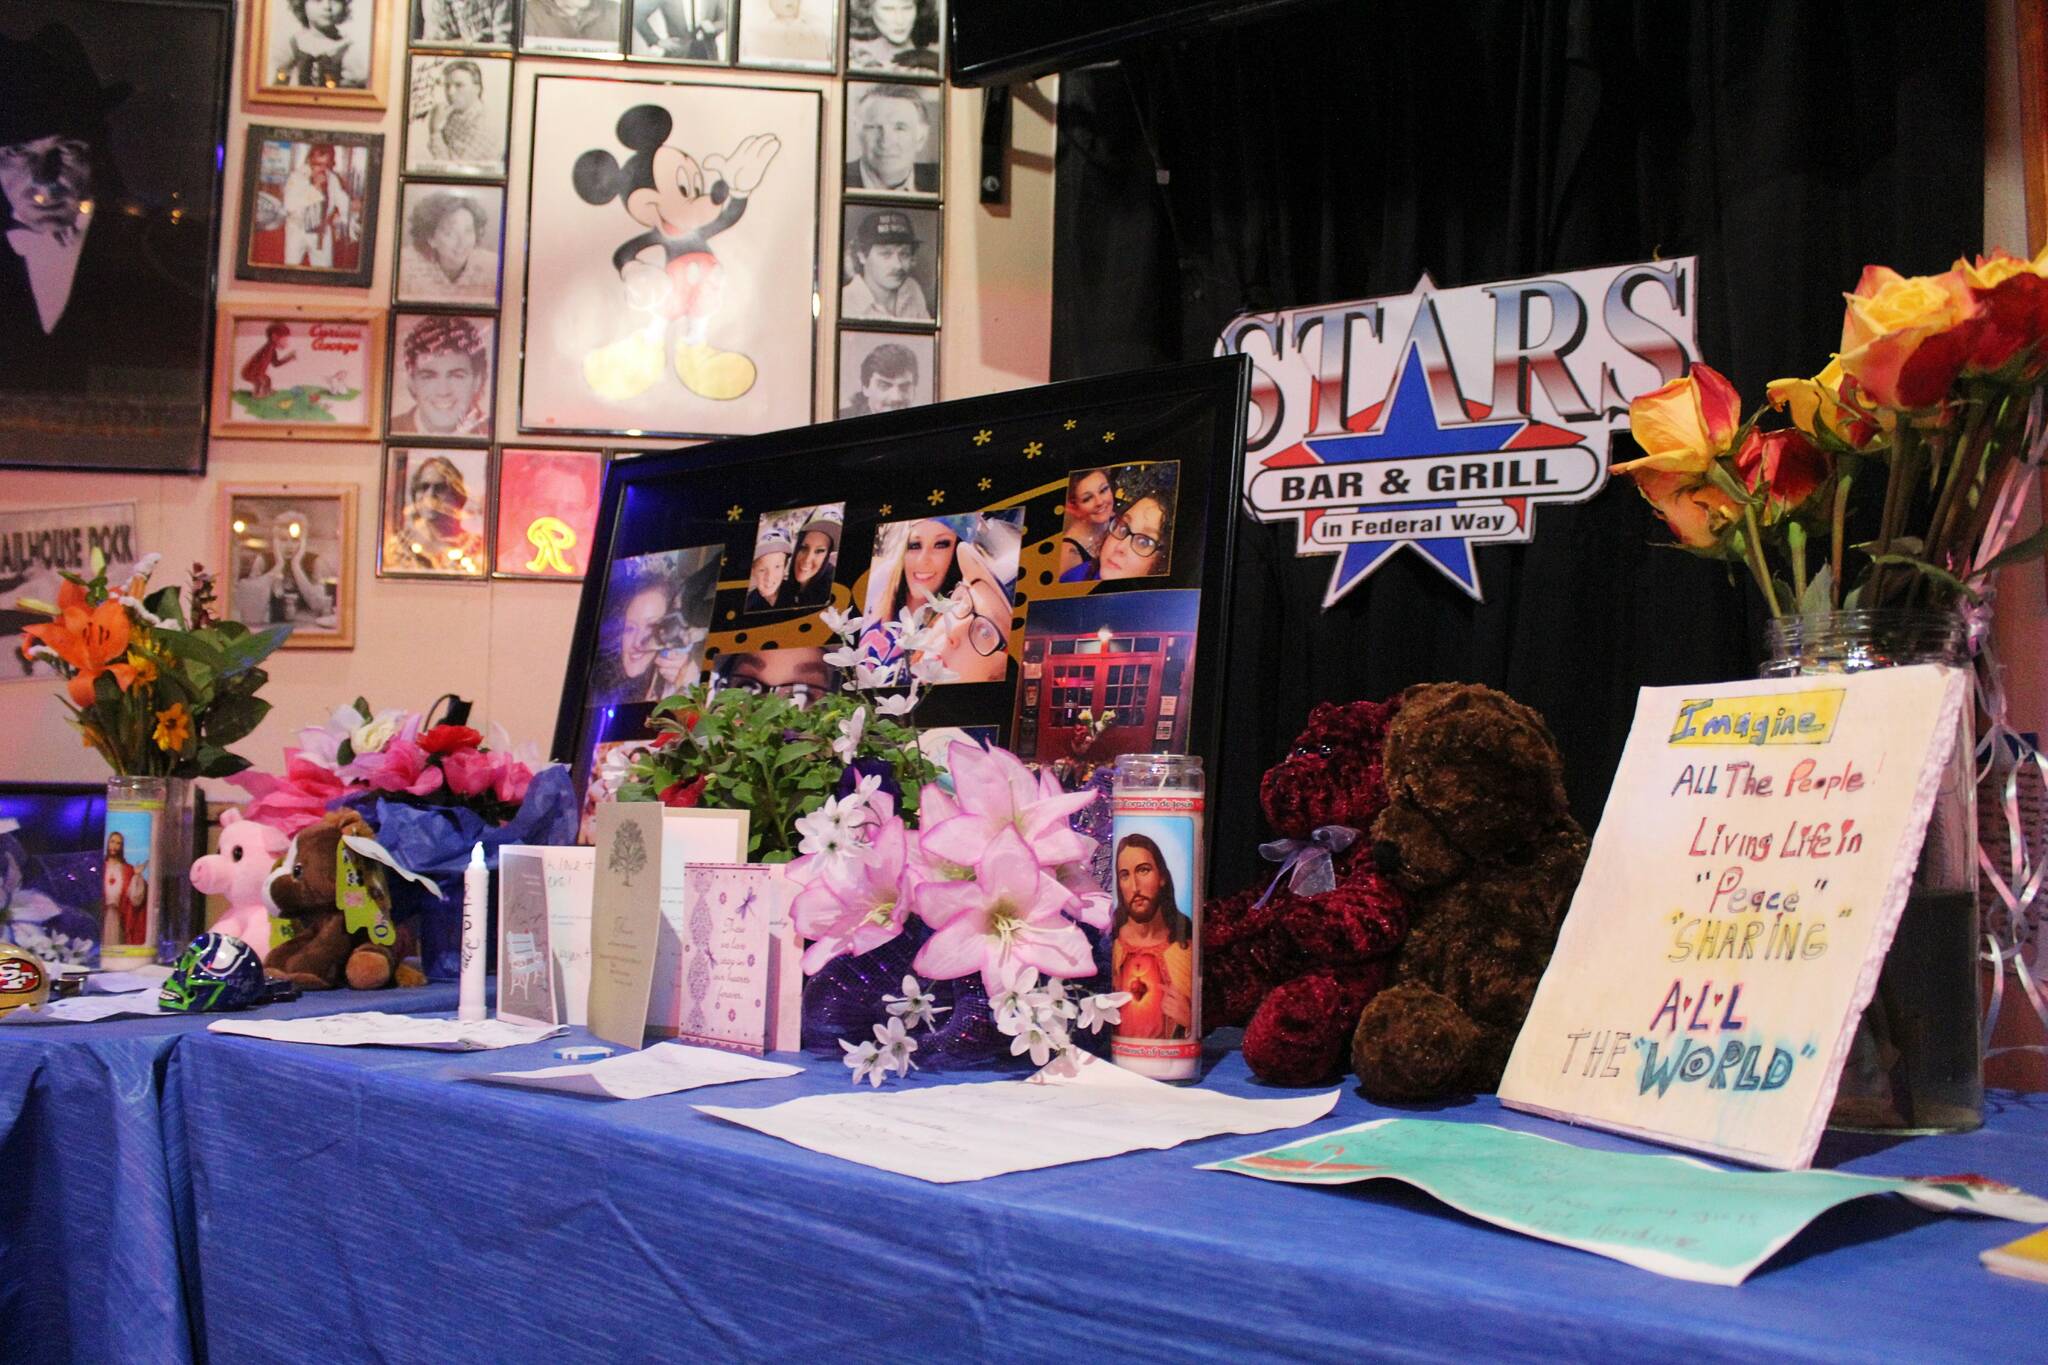 A memorial at Stars Bar & Grill includes photos, cards, flowers and trinkets set in reverence of Jessyca Hohn and Katie Duhnke, who were killed just outside the bar May 21. Alex Bruell / The Mirror